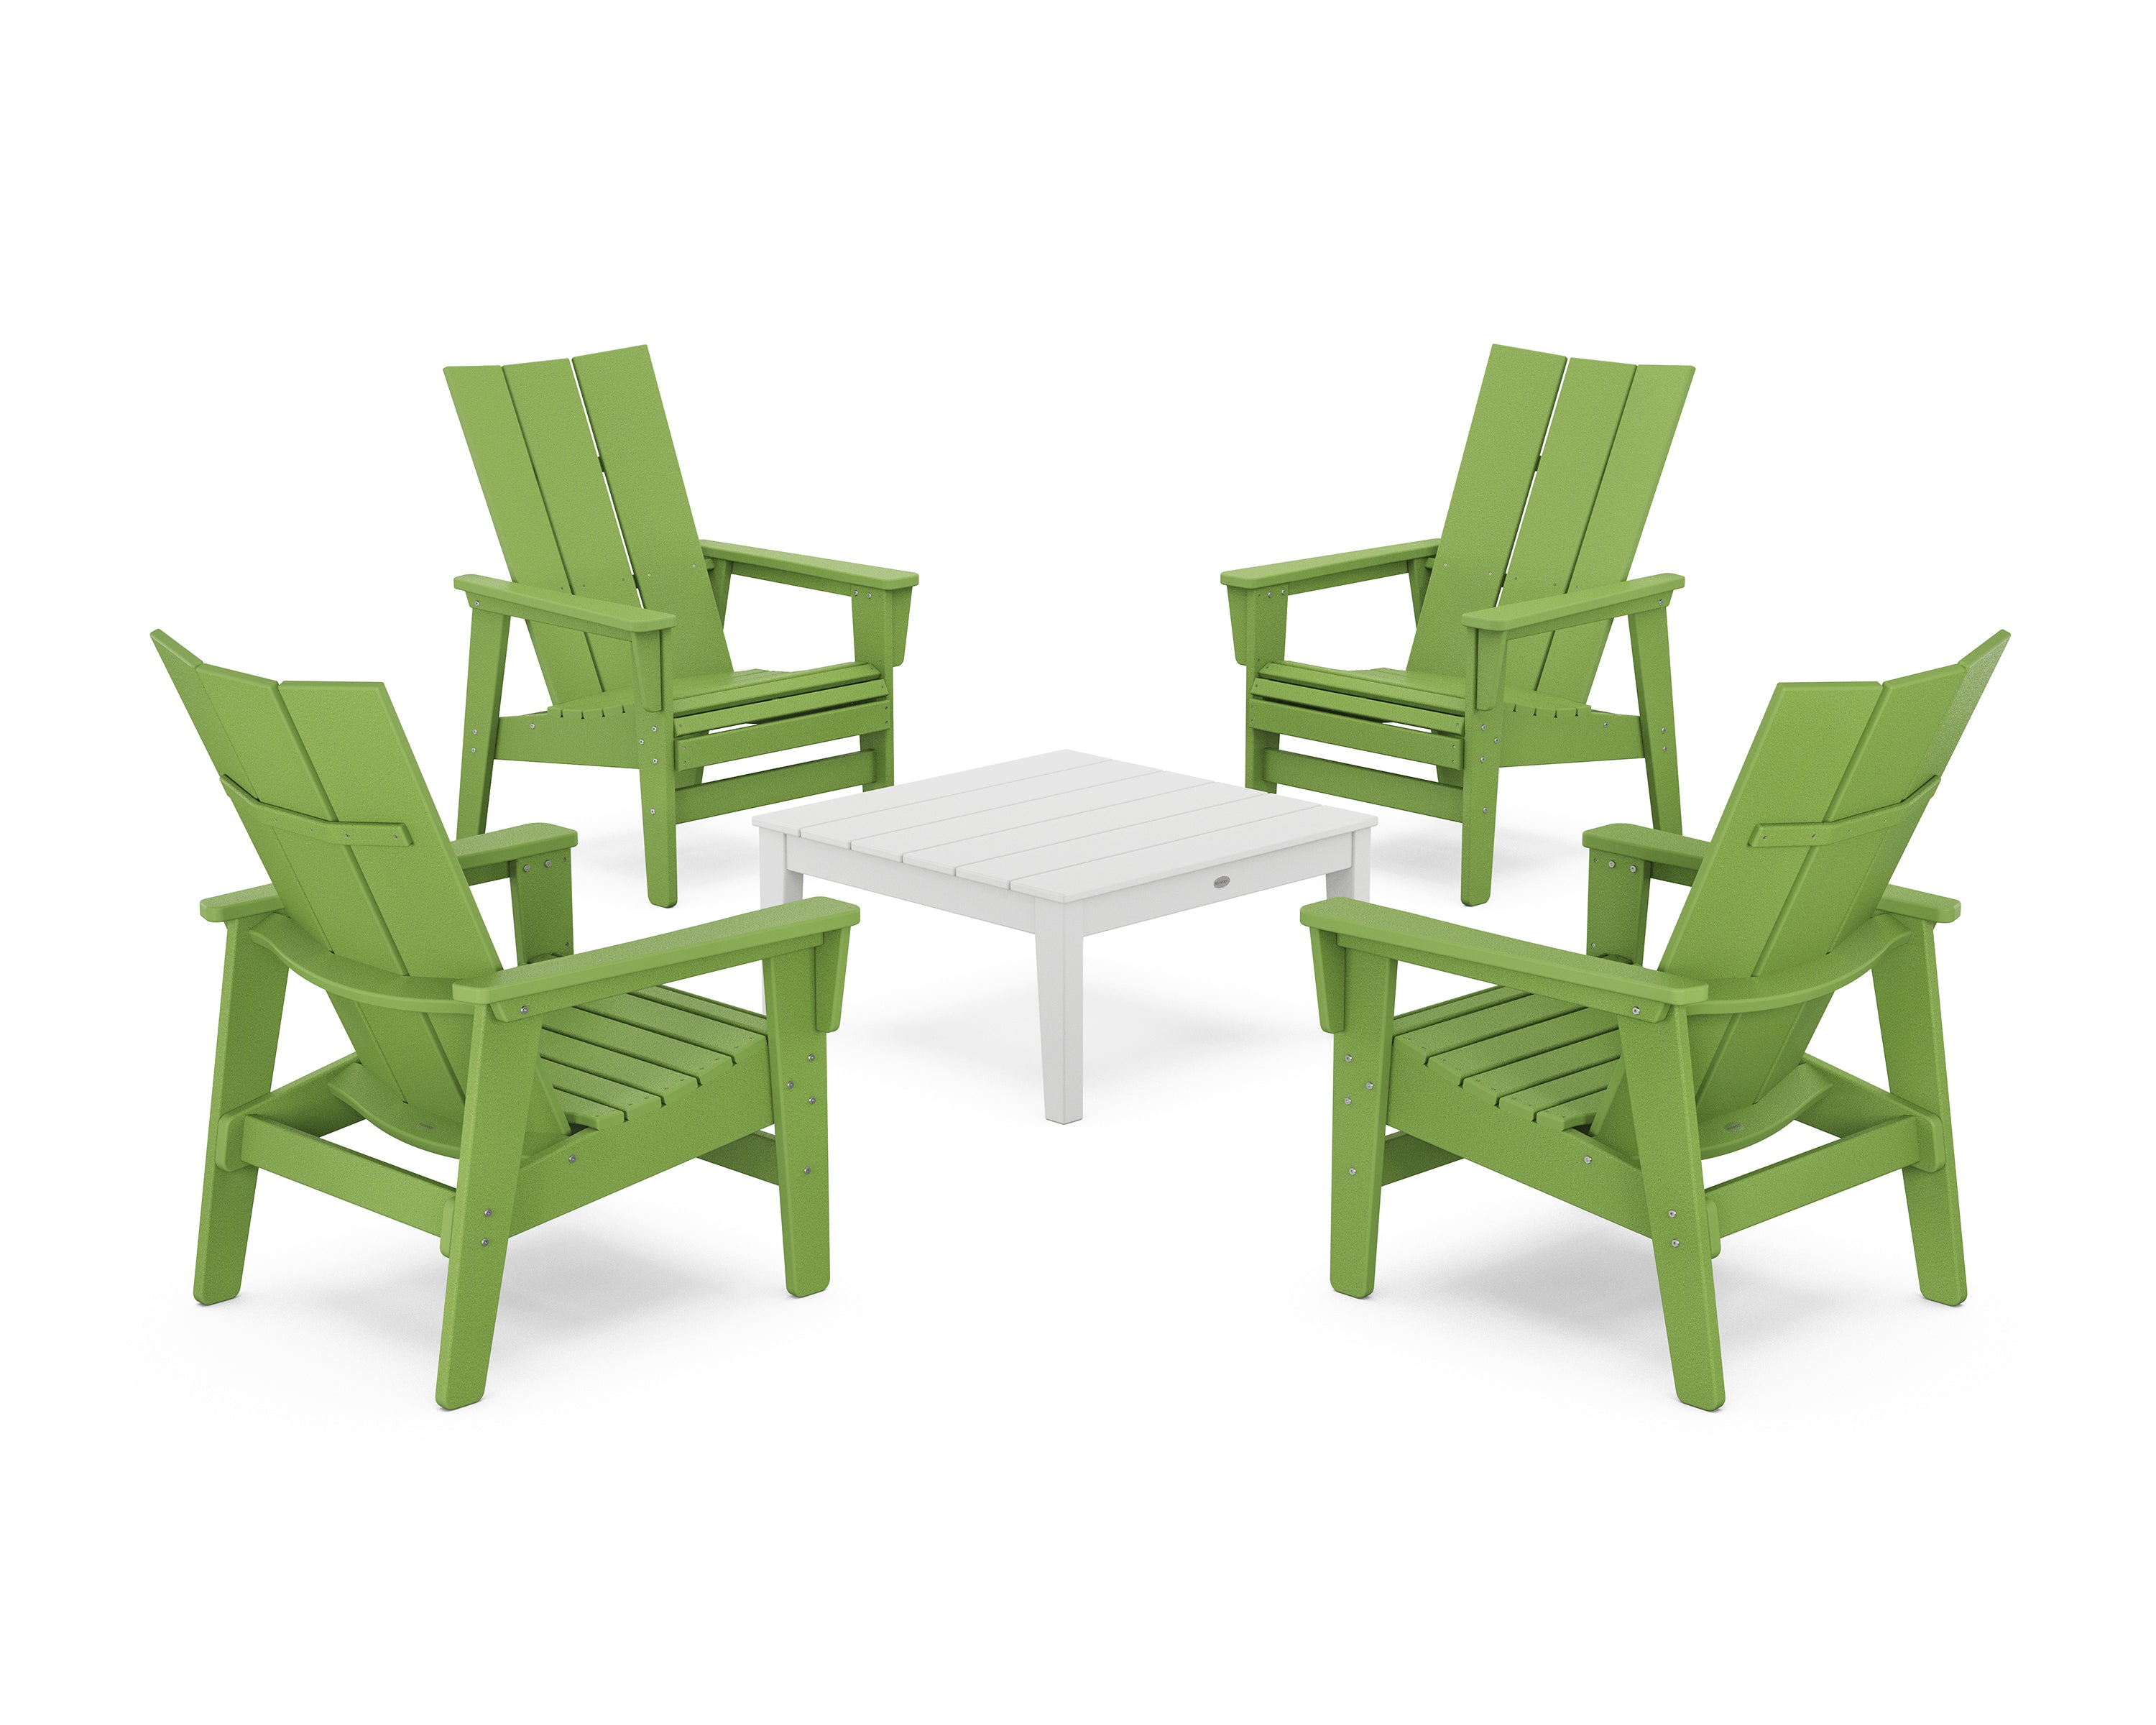 POLYWOOD® 5-Piece Modern Grand Upright Adirondack Chair Conversation Group in Lime / White